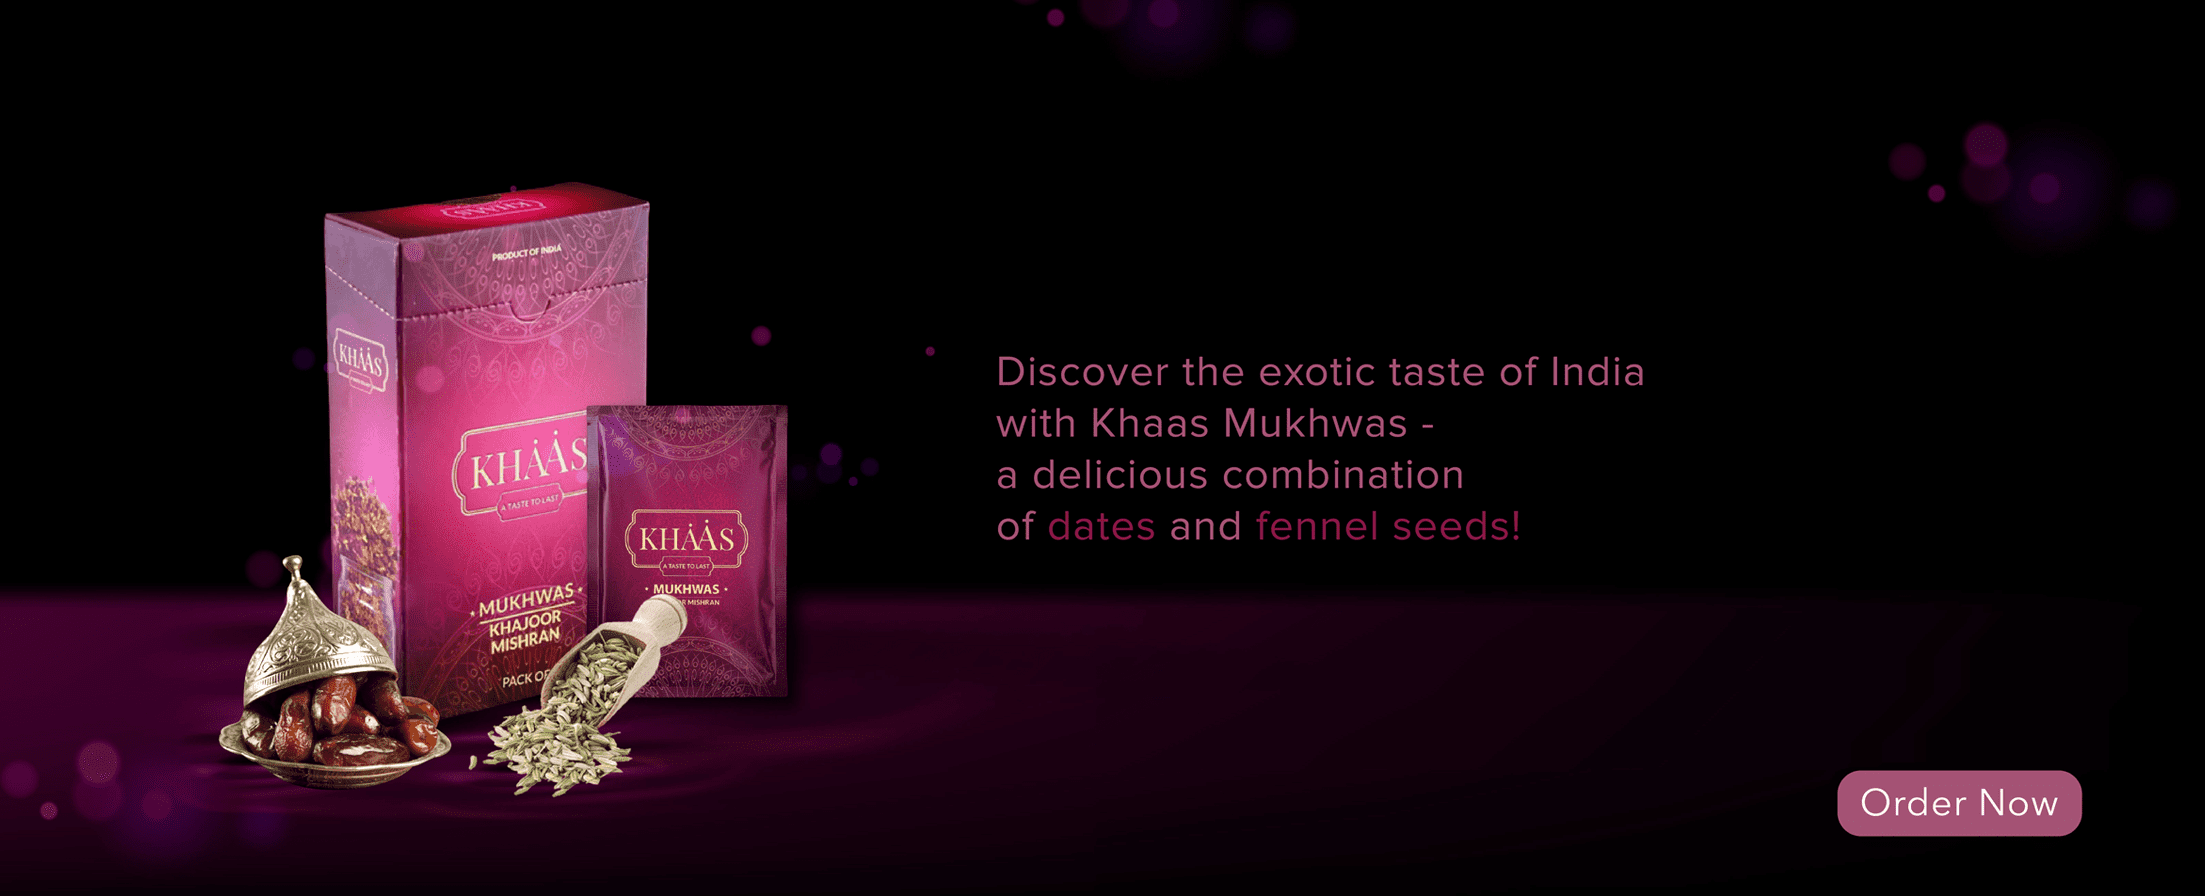 Discover the exotic taste of India